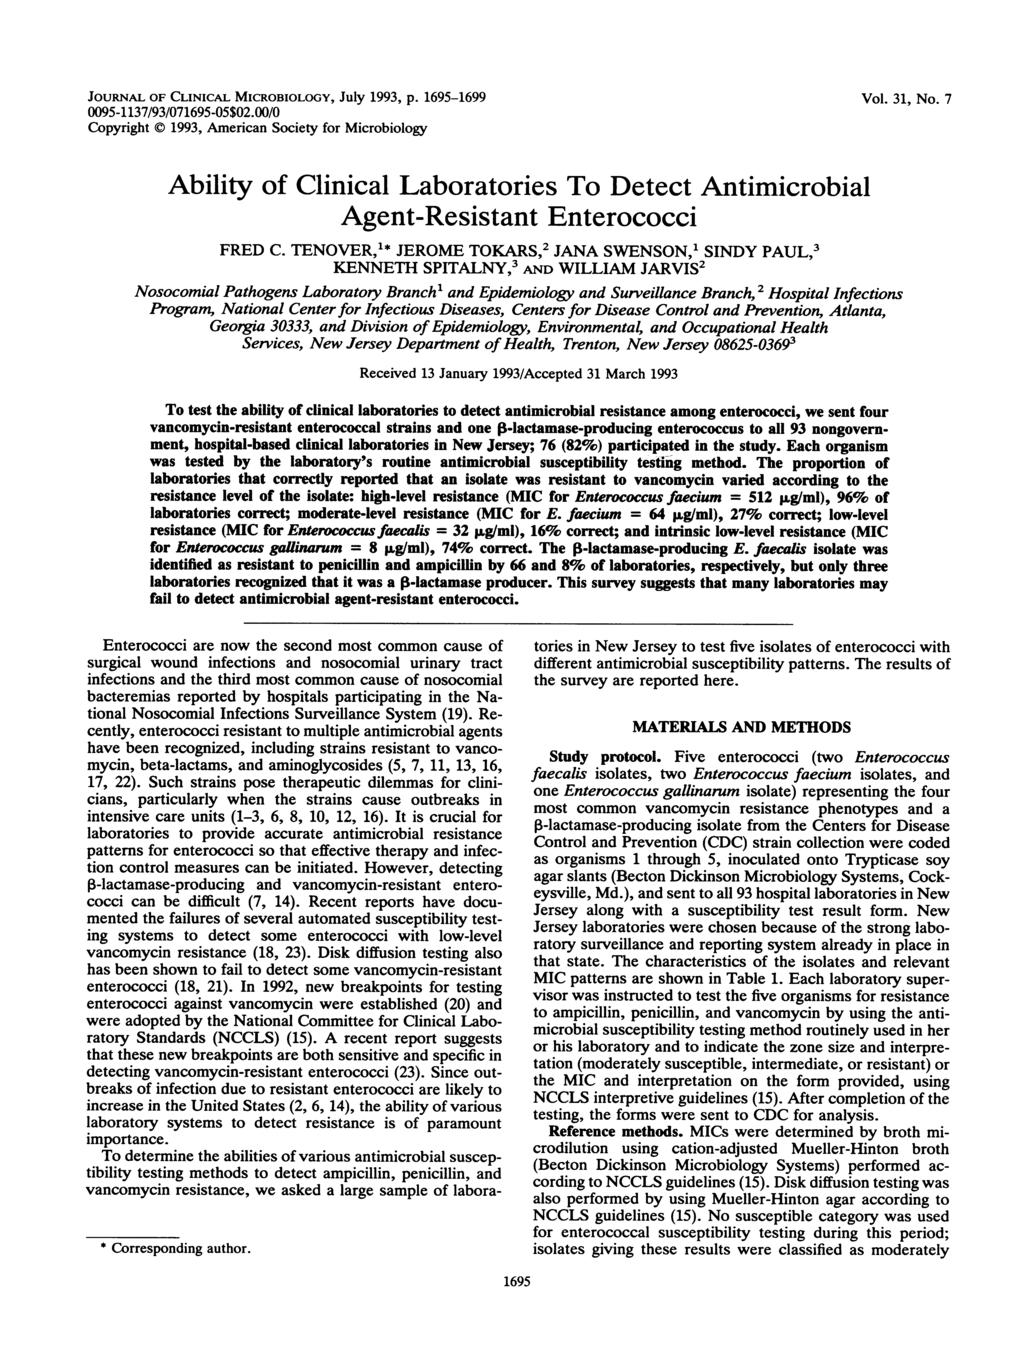 JOURNAL OF CLINICAL MICROBIOLOGY, July 1993, p. 1695-1699 0095-1137/93/071695-05$02.00/0 Copyright 1993, American Society for Microbiology Vol. 31, No.